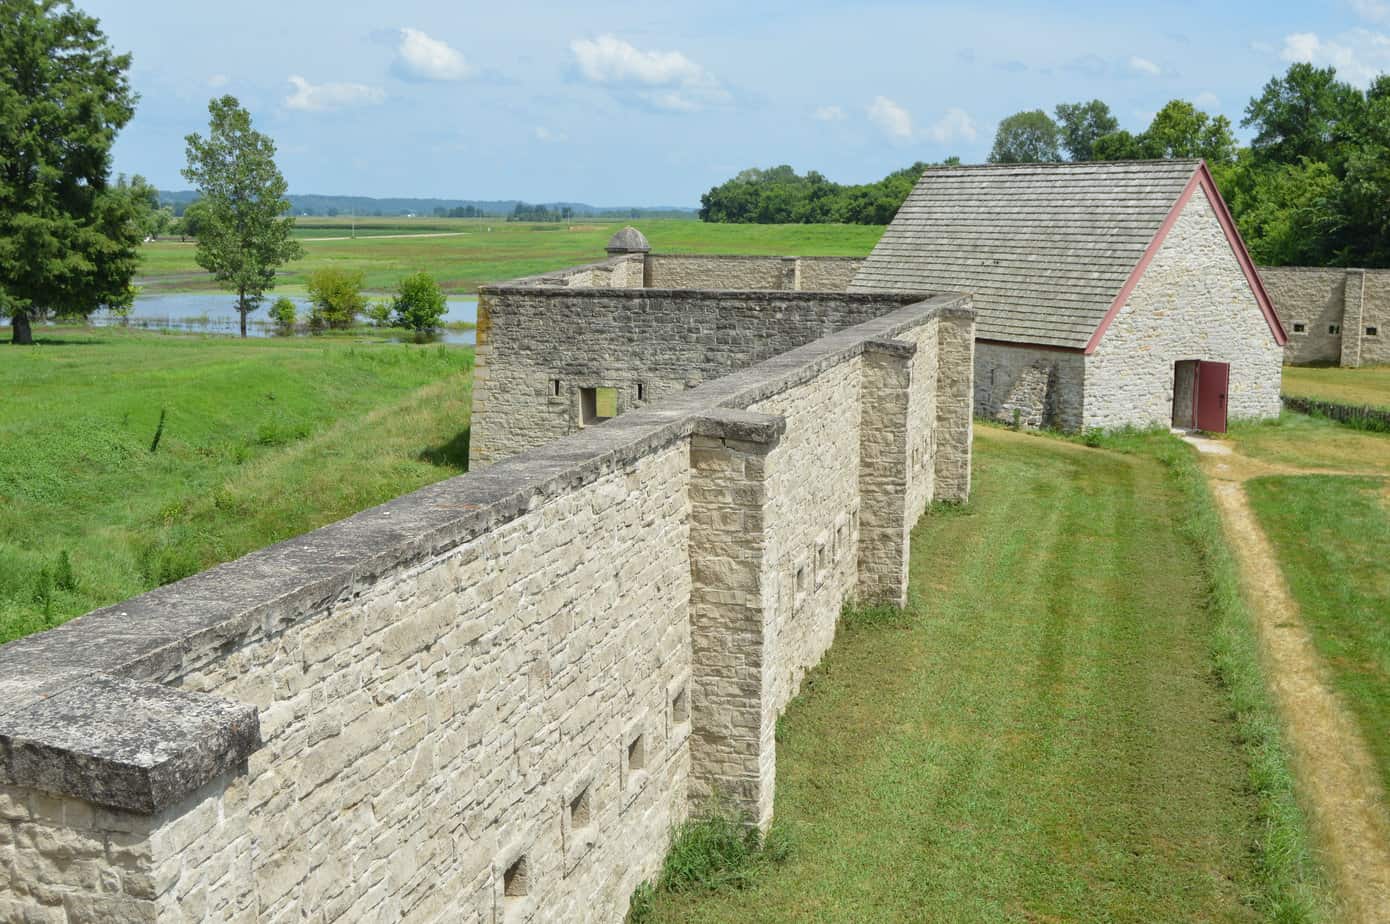 Tall stone walls surround important parts of historic Fort de Chartres in Southern Illinois.